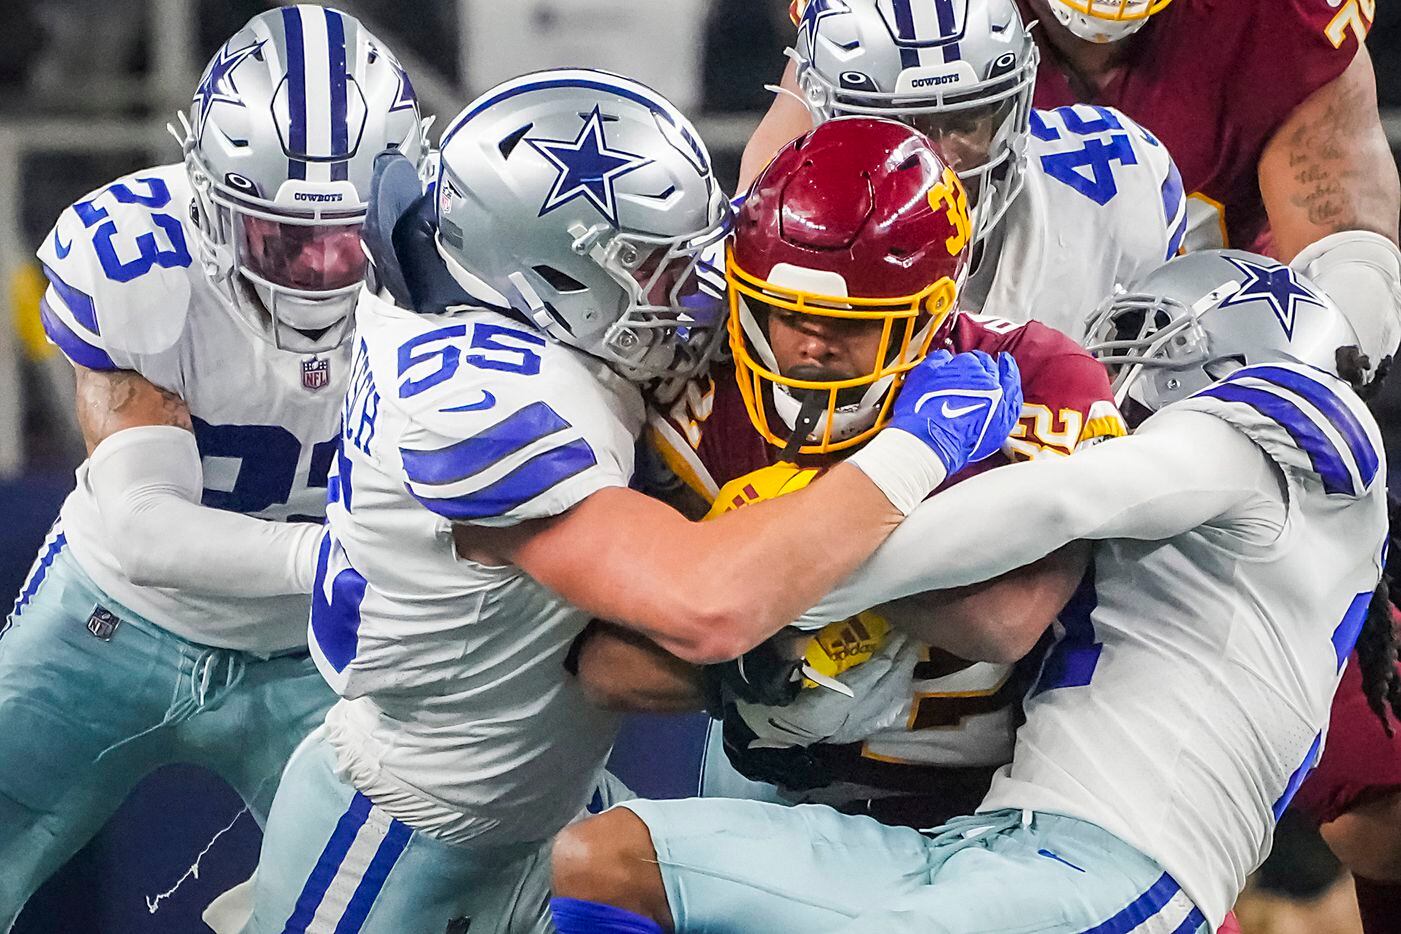 Washington Football Team running back Jaret Patterson (32) is brought down by Dallas Cowboys outside linebacker Leighton Vander Esch (55), cornerback Maurice Canady (31), middle linebacker Keanu Neal (42) and defensive back Darian Thompson (23) during the second half of an NFL football game at AT&T Stadium on Sunday, Dec. 26, 2021, in Arlington. The Cowboys won the game 56-14.